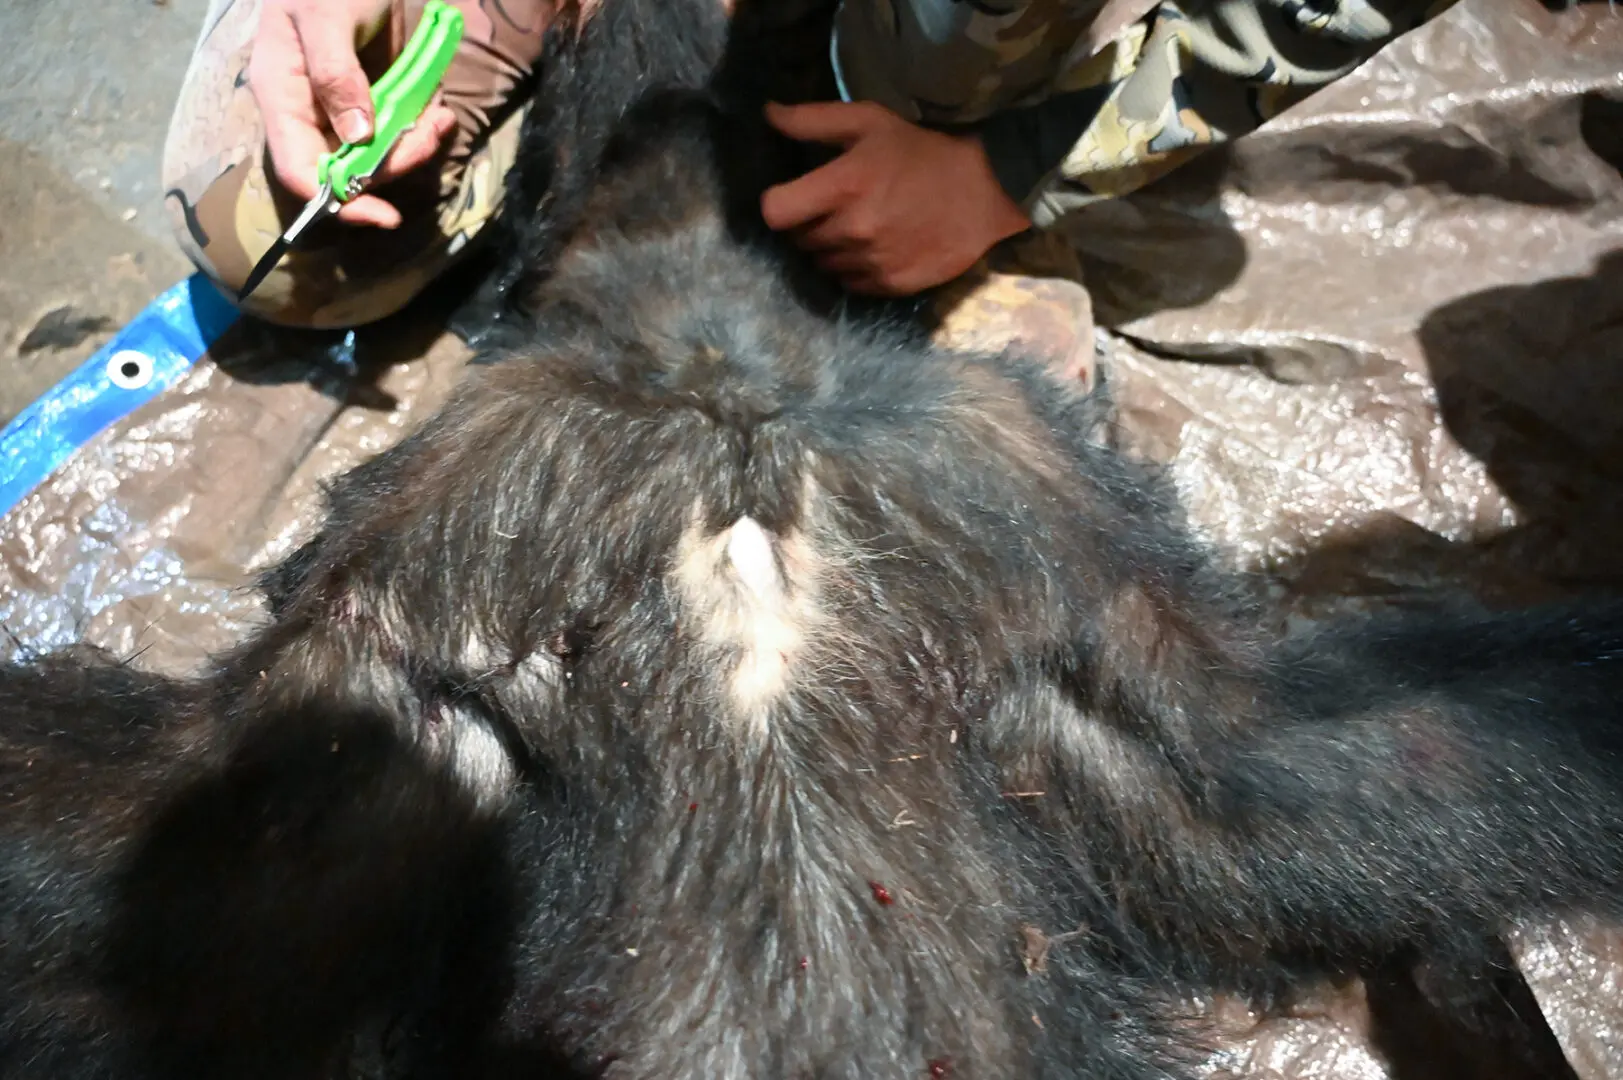 A person cutting something off of the back of a bear.